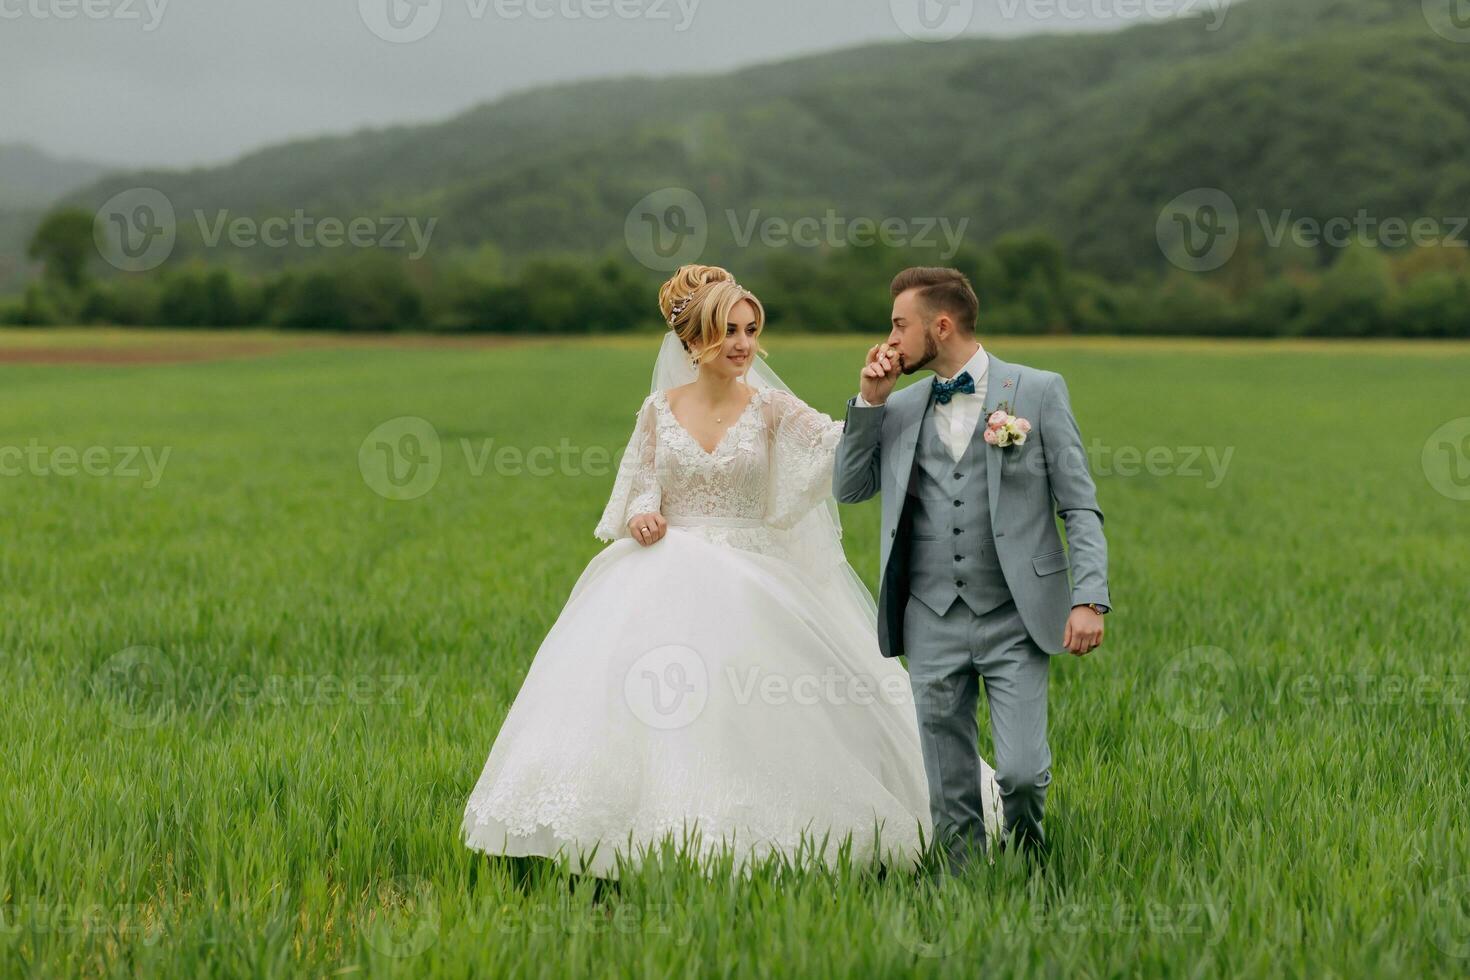 Wide-angle portrait of the bride and groom walking on a green meadow against the background of mountains. Front view. Magnificent dress. Stylish groom. Wedding photo